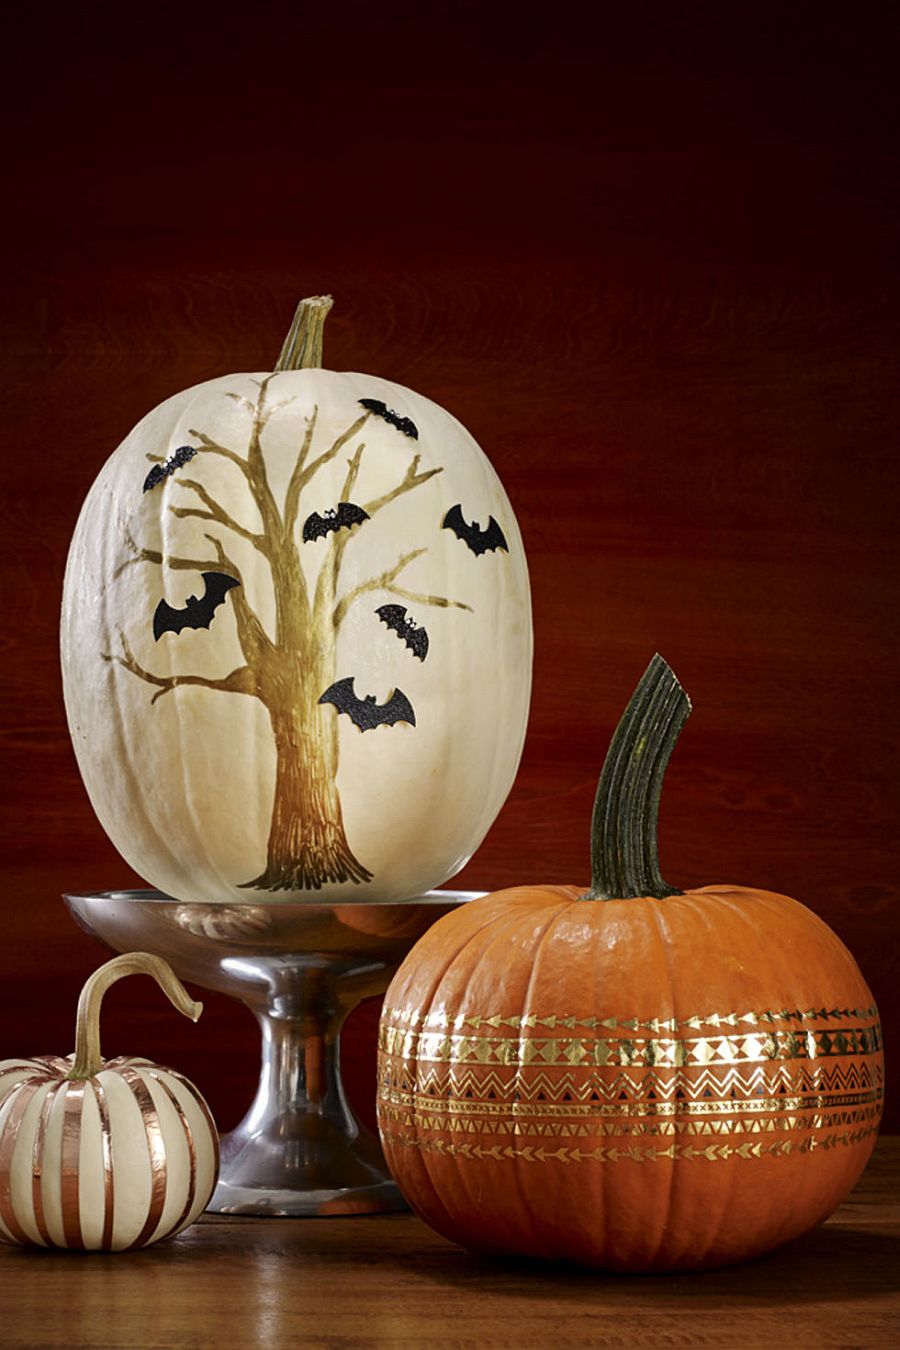 Painted pumpkin brings a touch of spooky charm to the Halloween setting